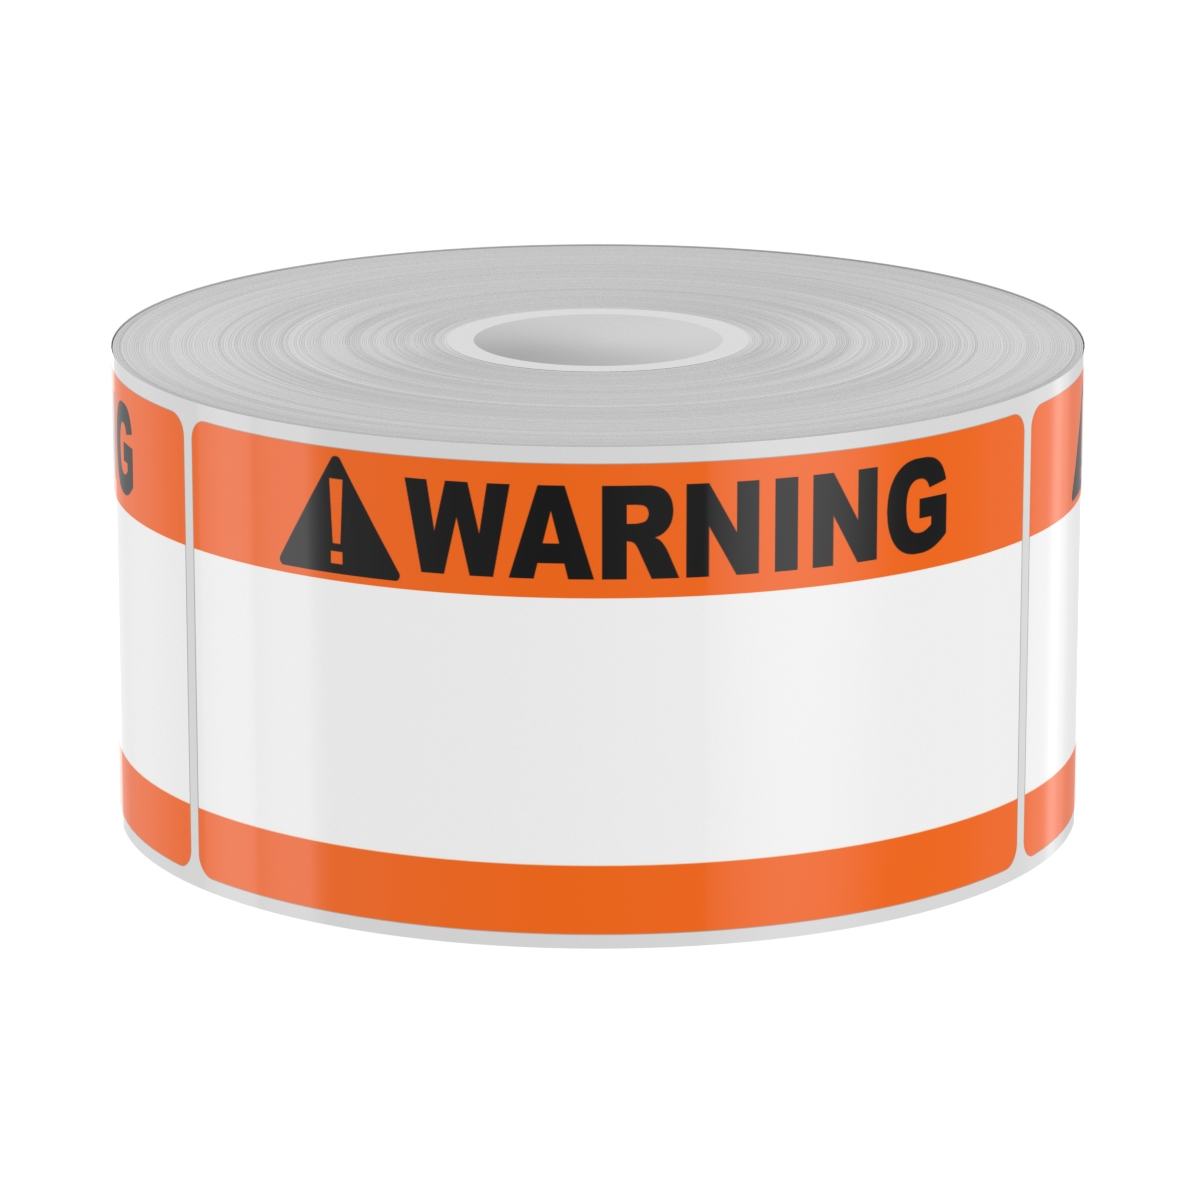 Detail view for 250 2" x 4" High-Performance Orange Double Band with Black Warning